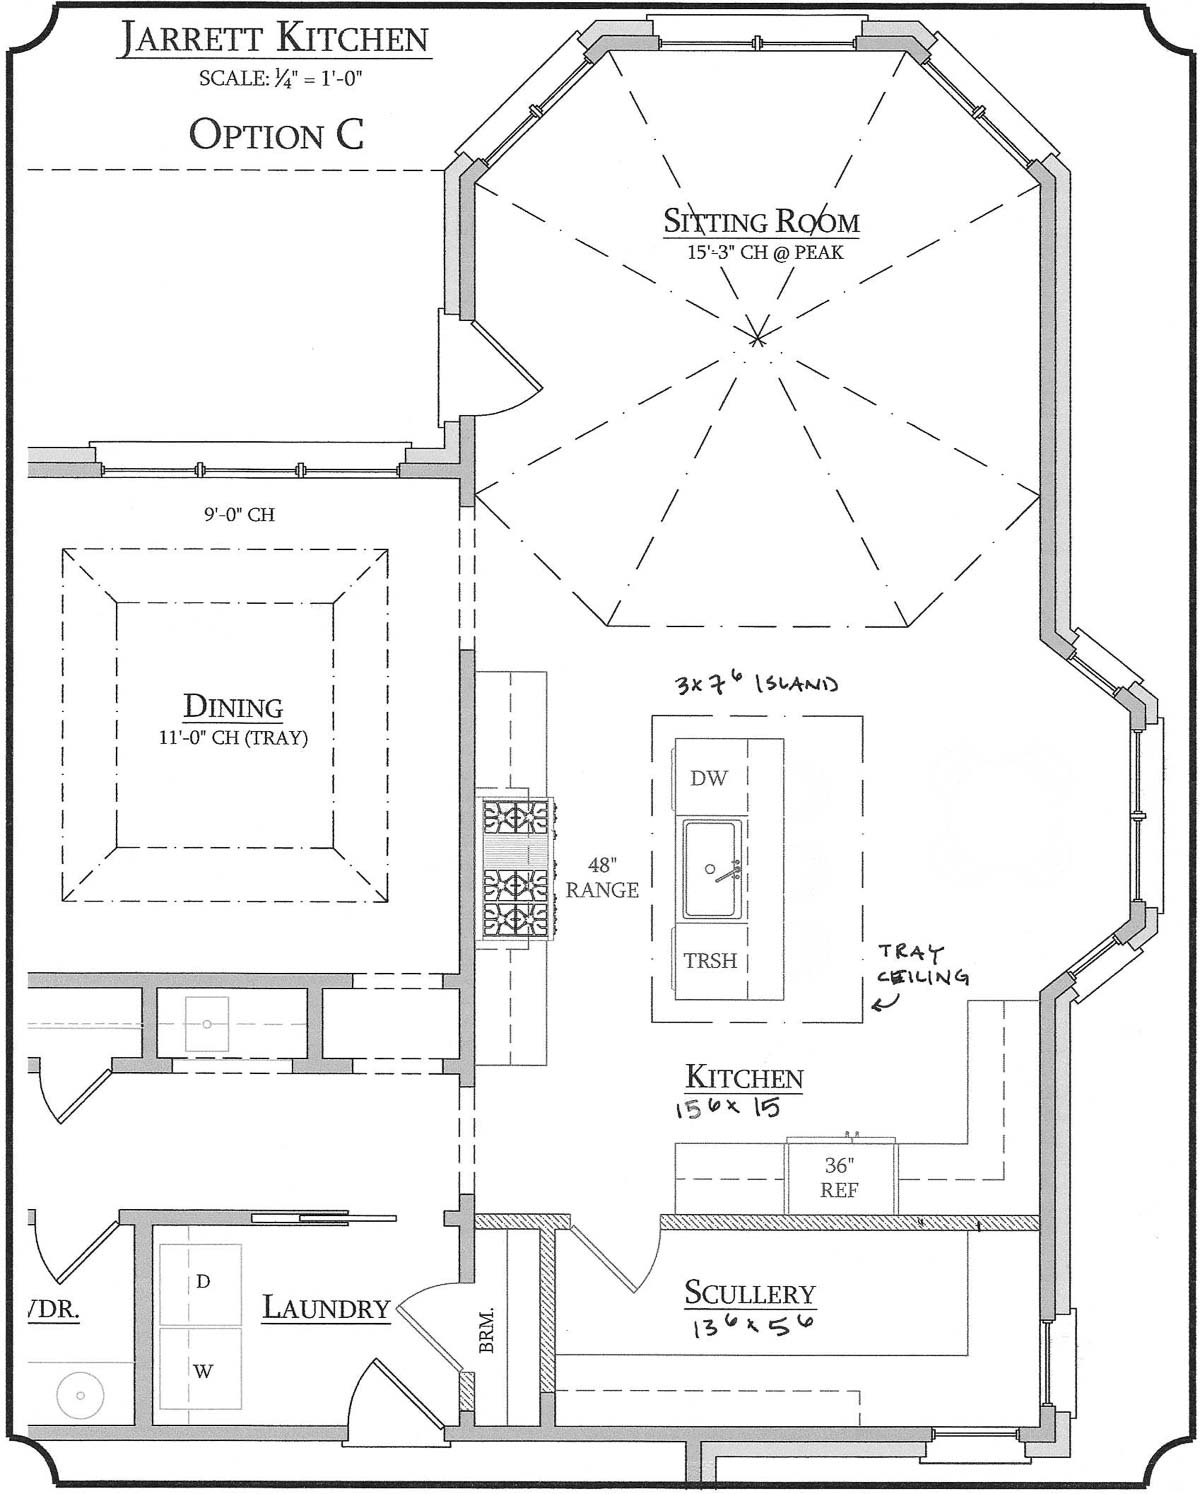 Kitchen layout option C with a butler's pantry